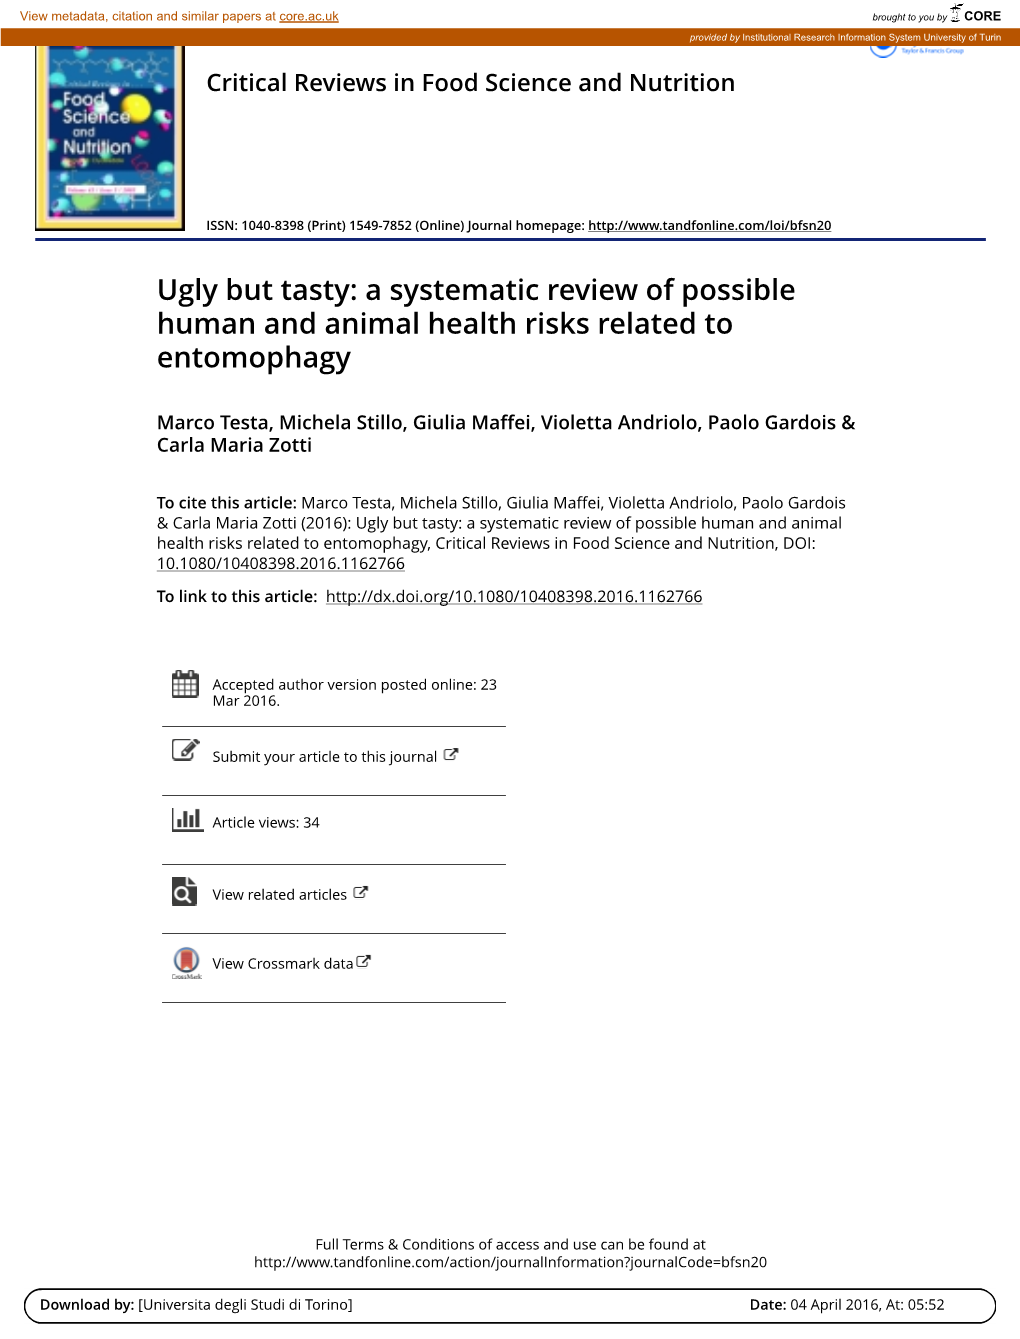 A Systematic Review of Possible Human and Animal Health Risks Related to Entomophagy